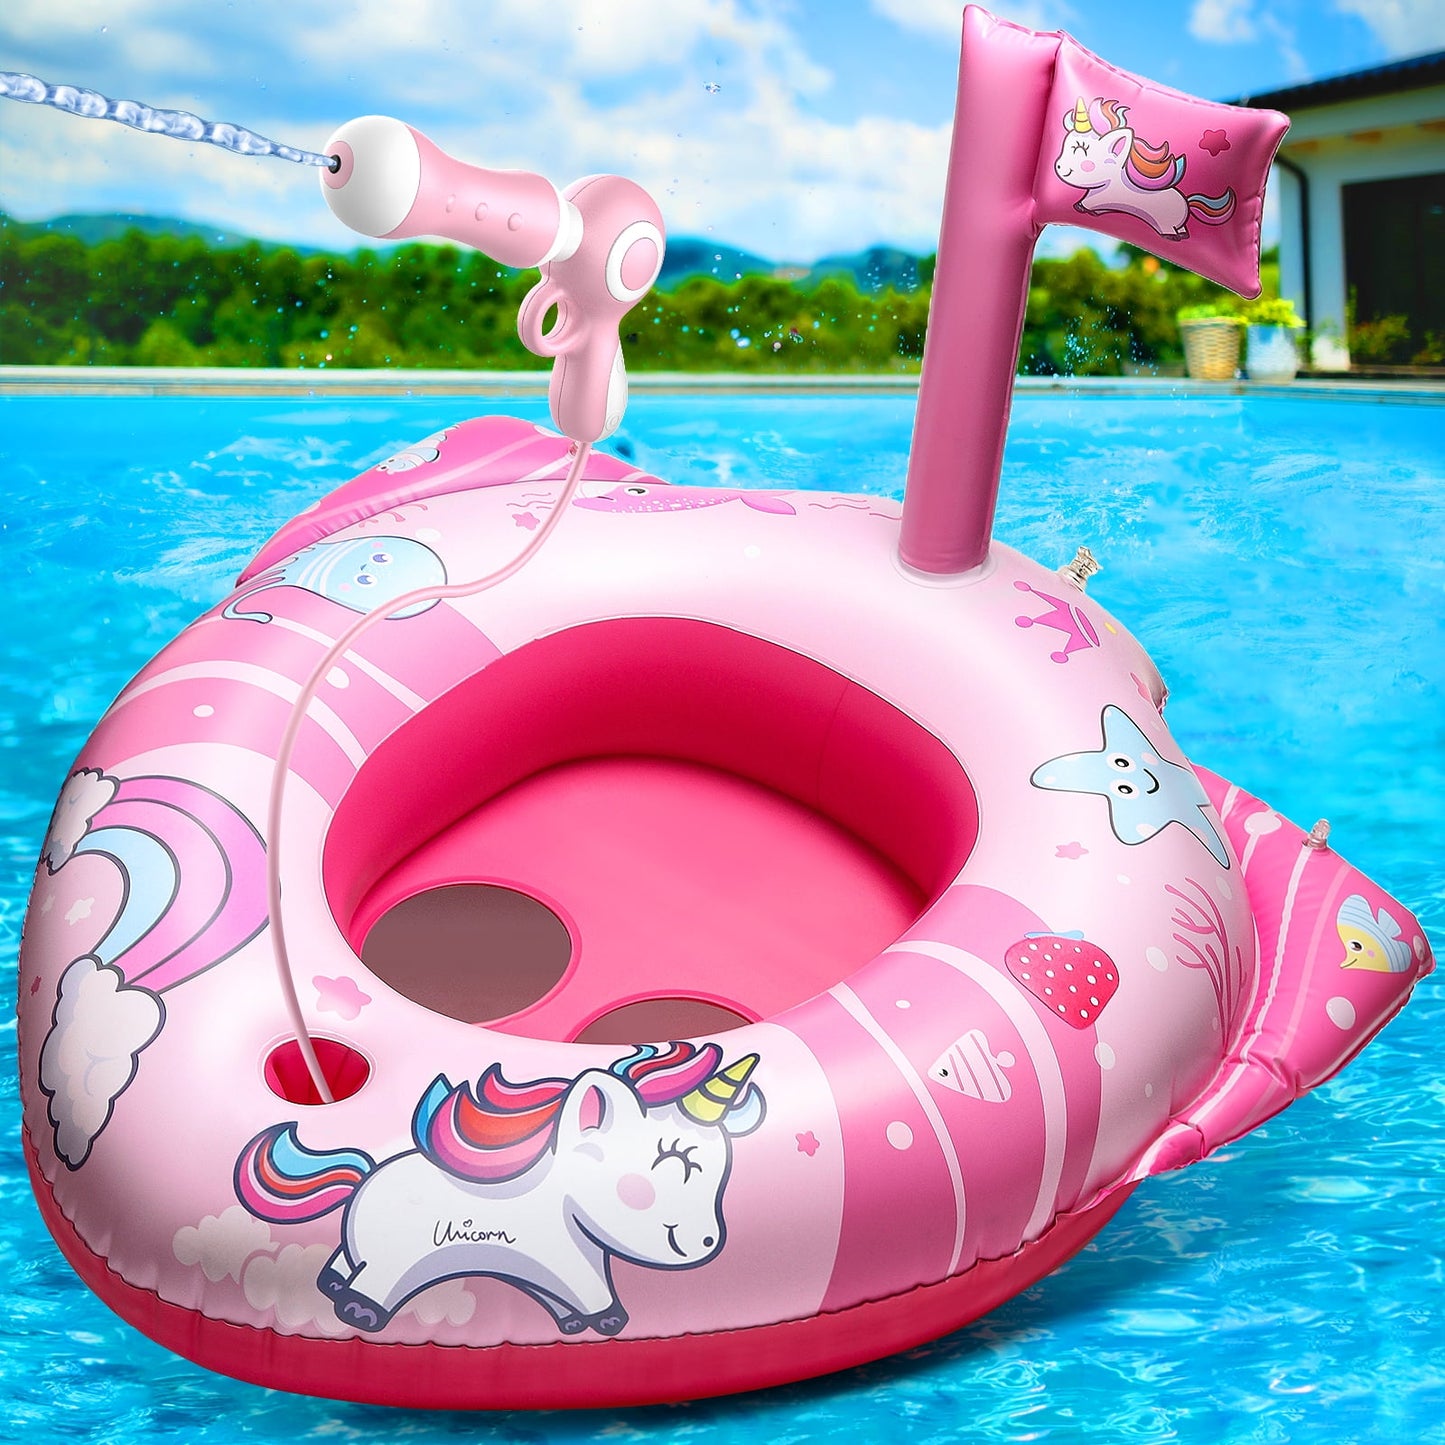 Pool Floats for Kids and Toddlers, Inflatable Pool Toys with Water Gun, Swimming Pool Toys for Toddlers 1-3, Boys and Girls for Aged 3-8 Years